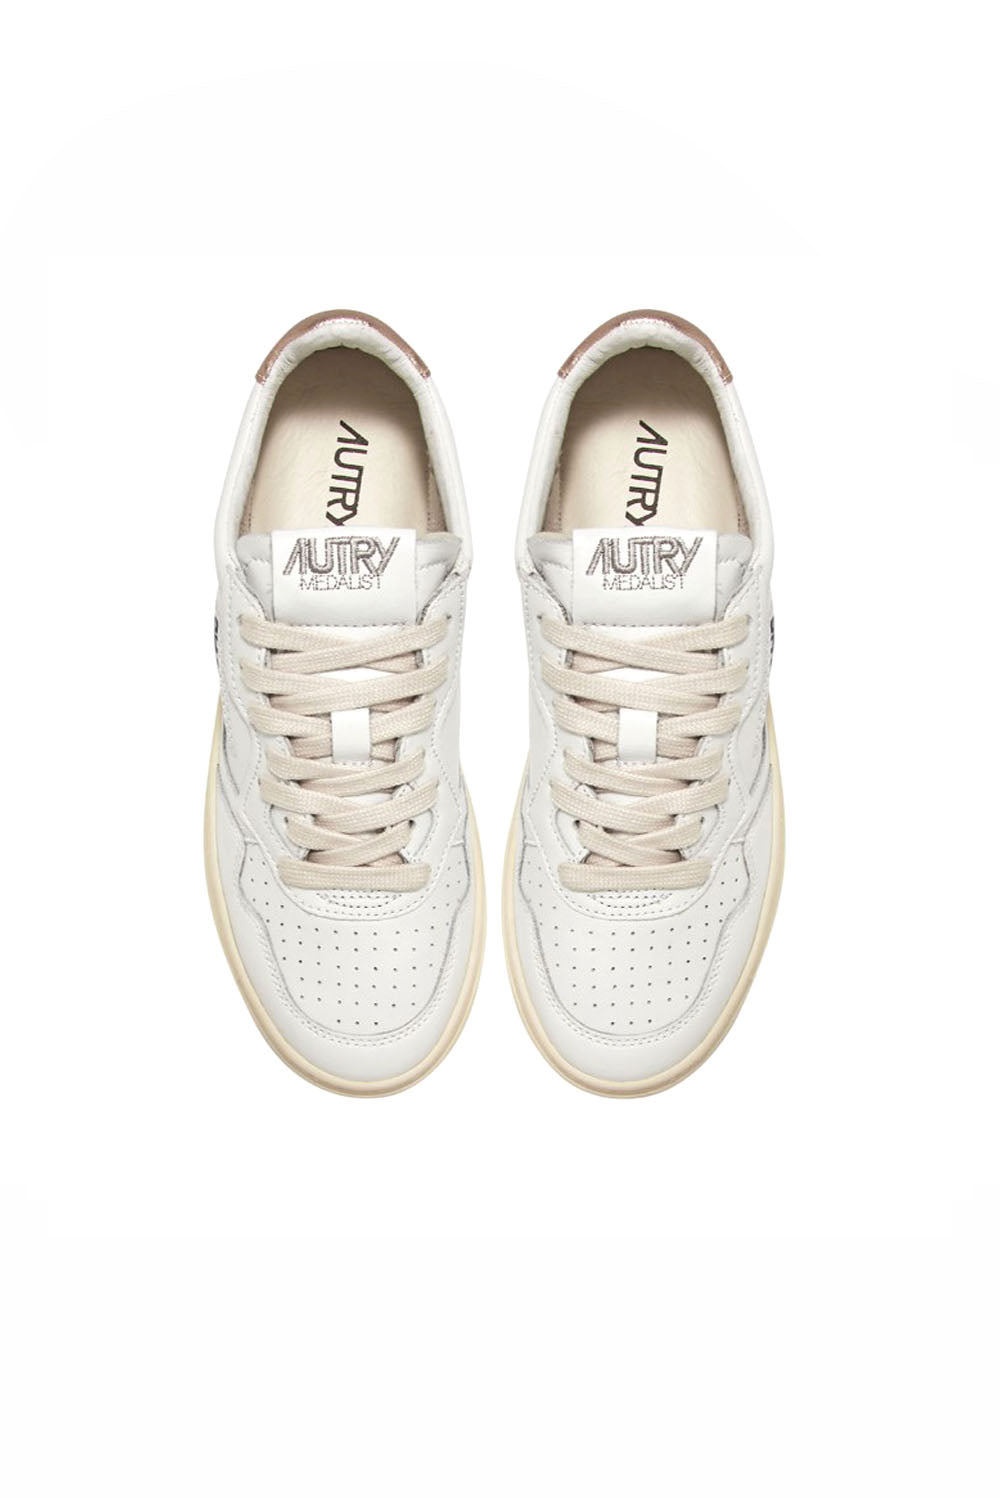  Autry Sneakers Medalist Low Woman - 8